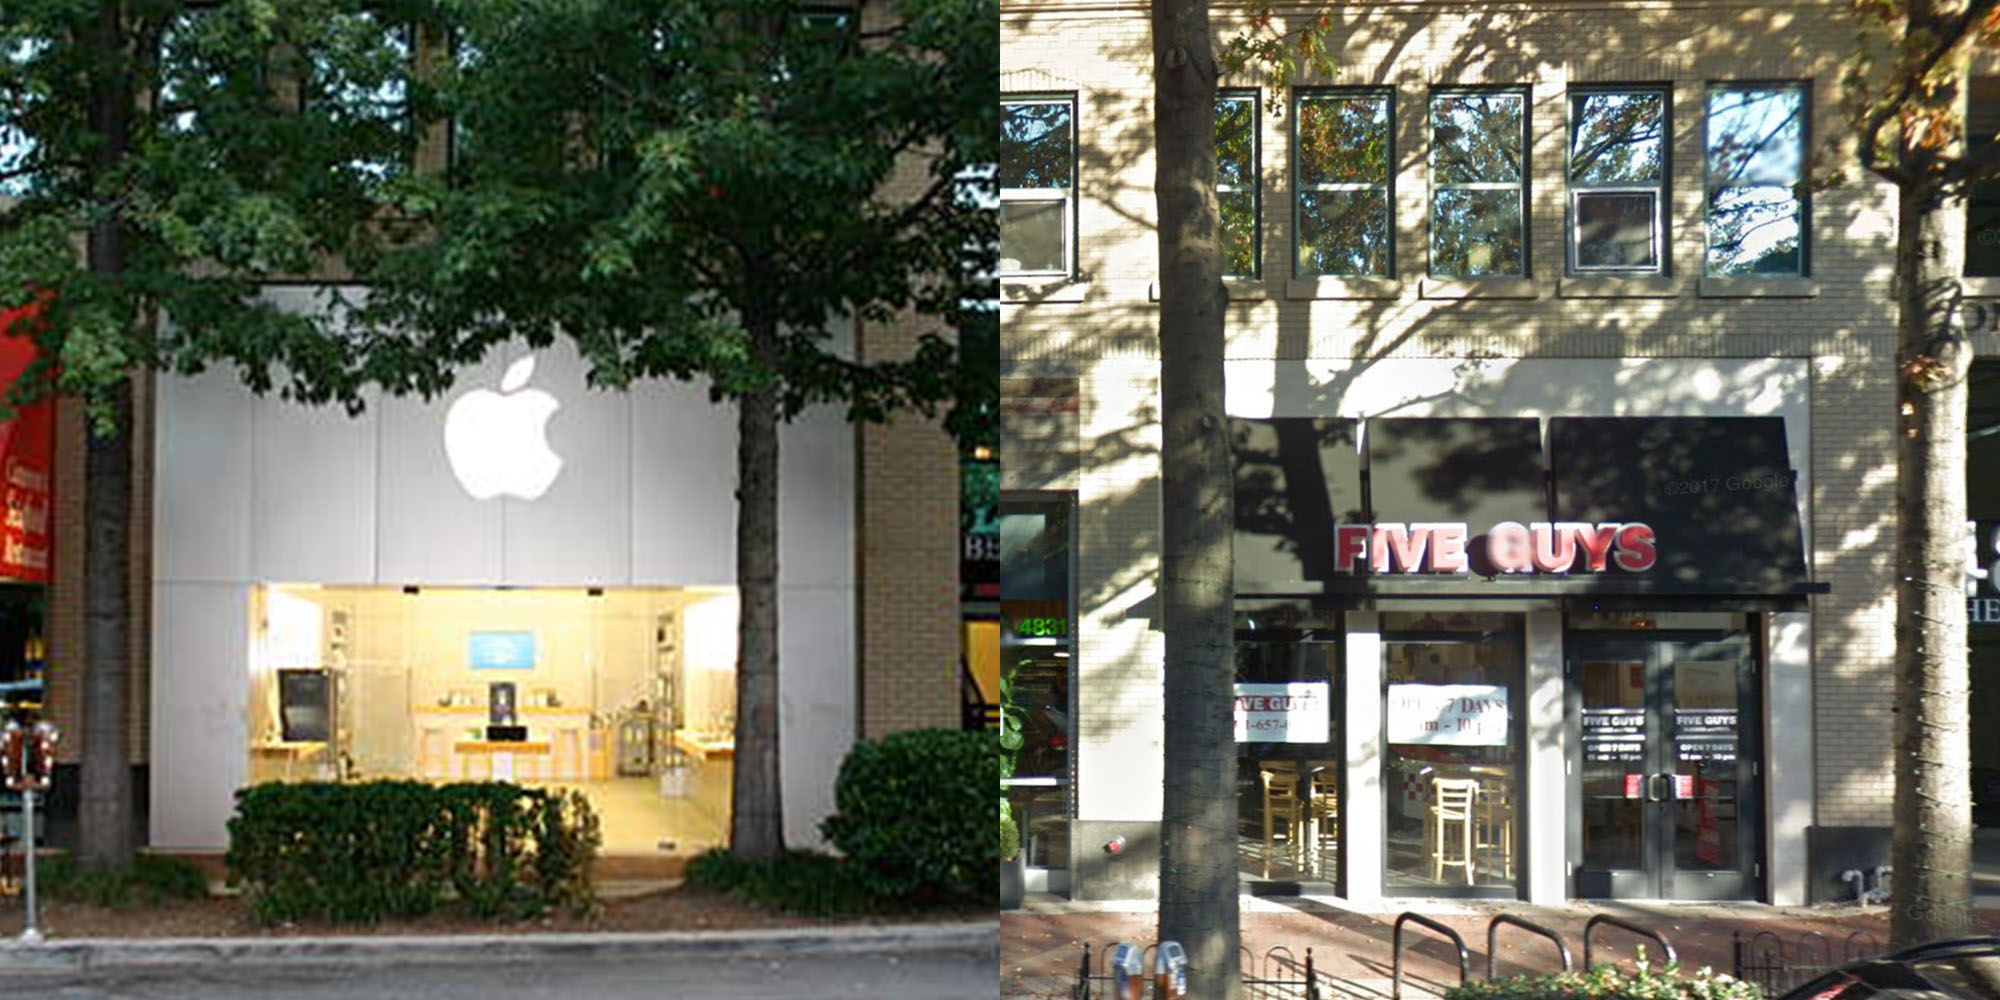 Apple&#39;s former retail stores: Where are they now? - 9to5Mac